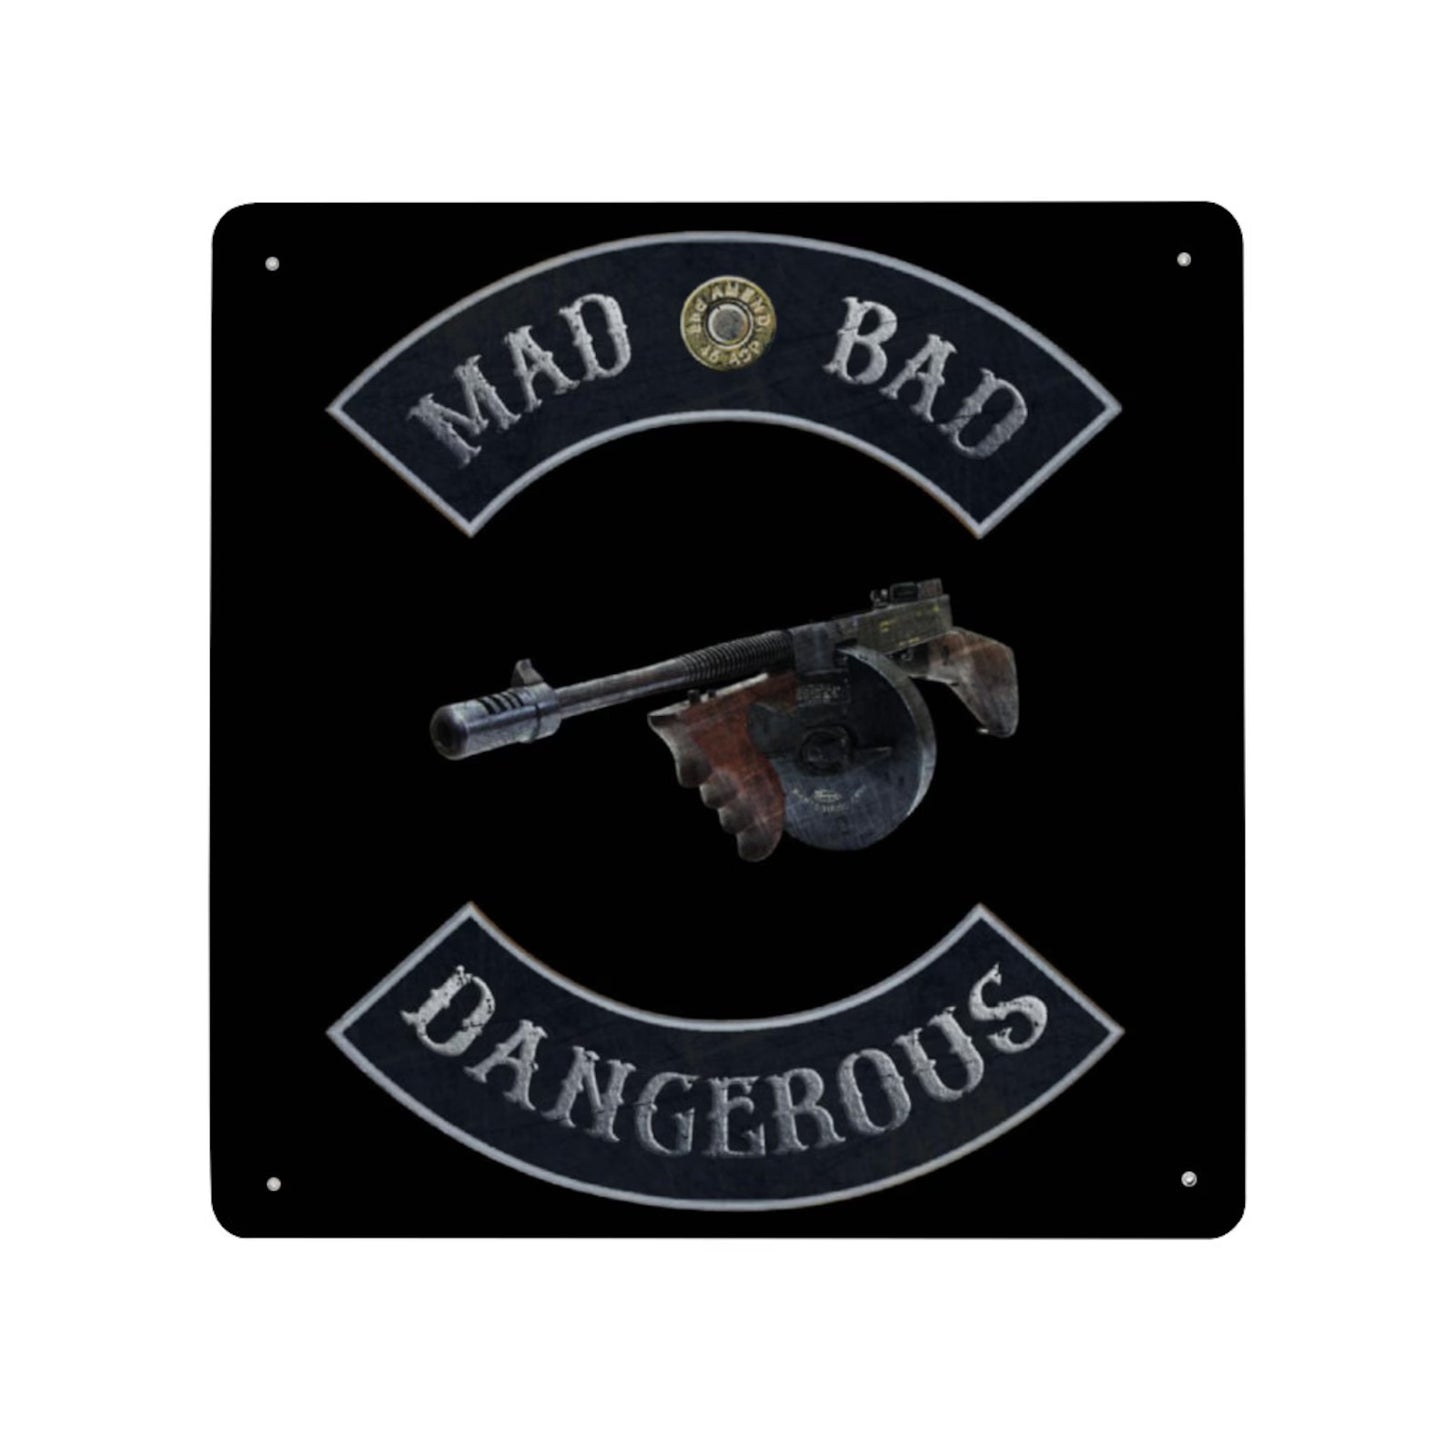 Mad Bad and Dangerous with Tommy Gun Print on Metal